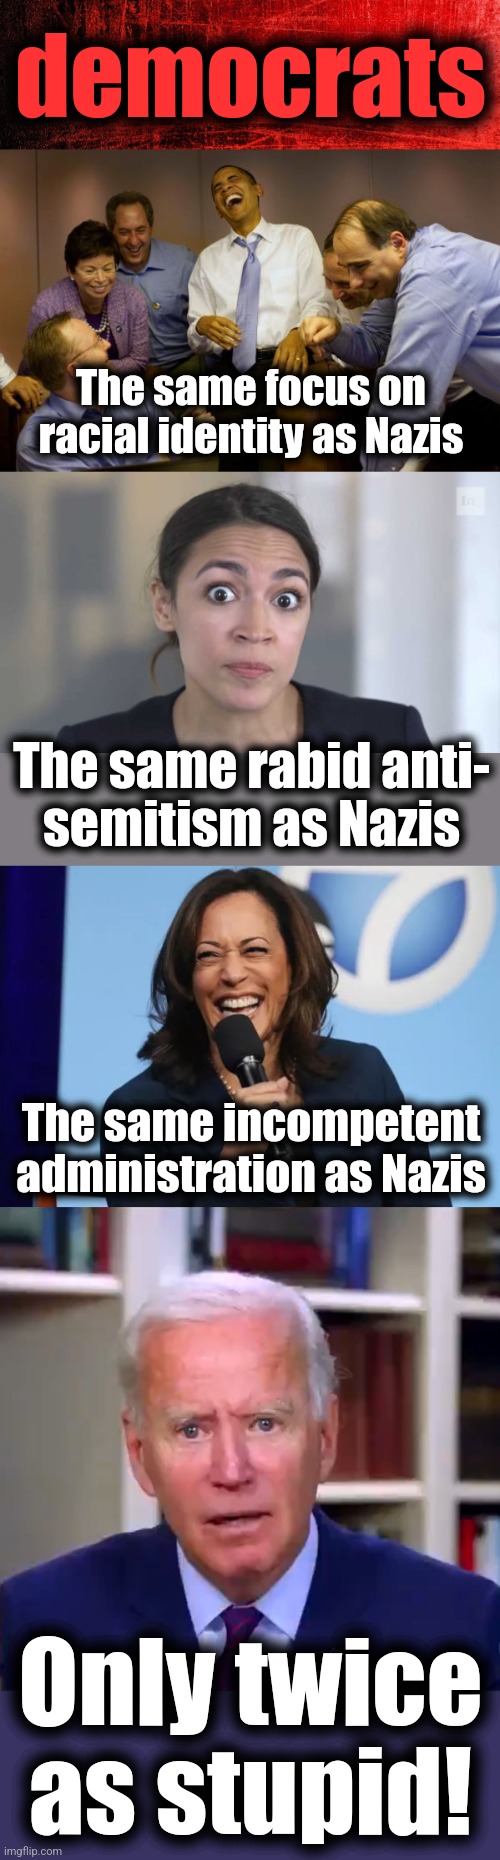 All you need to know about democrats | democrats; The same focus on racial identity as Nazis; The same rabid anti-
semitism as Nazis; The same incompetent administration as Nazis; Only twice
as stupid! | image tagged in memes,crazy alexandria ocasio-cortez,kamala harris laugh,slow joe biden dementia face,democrats,nazis | made w/ Imgflip meme maker